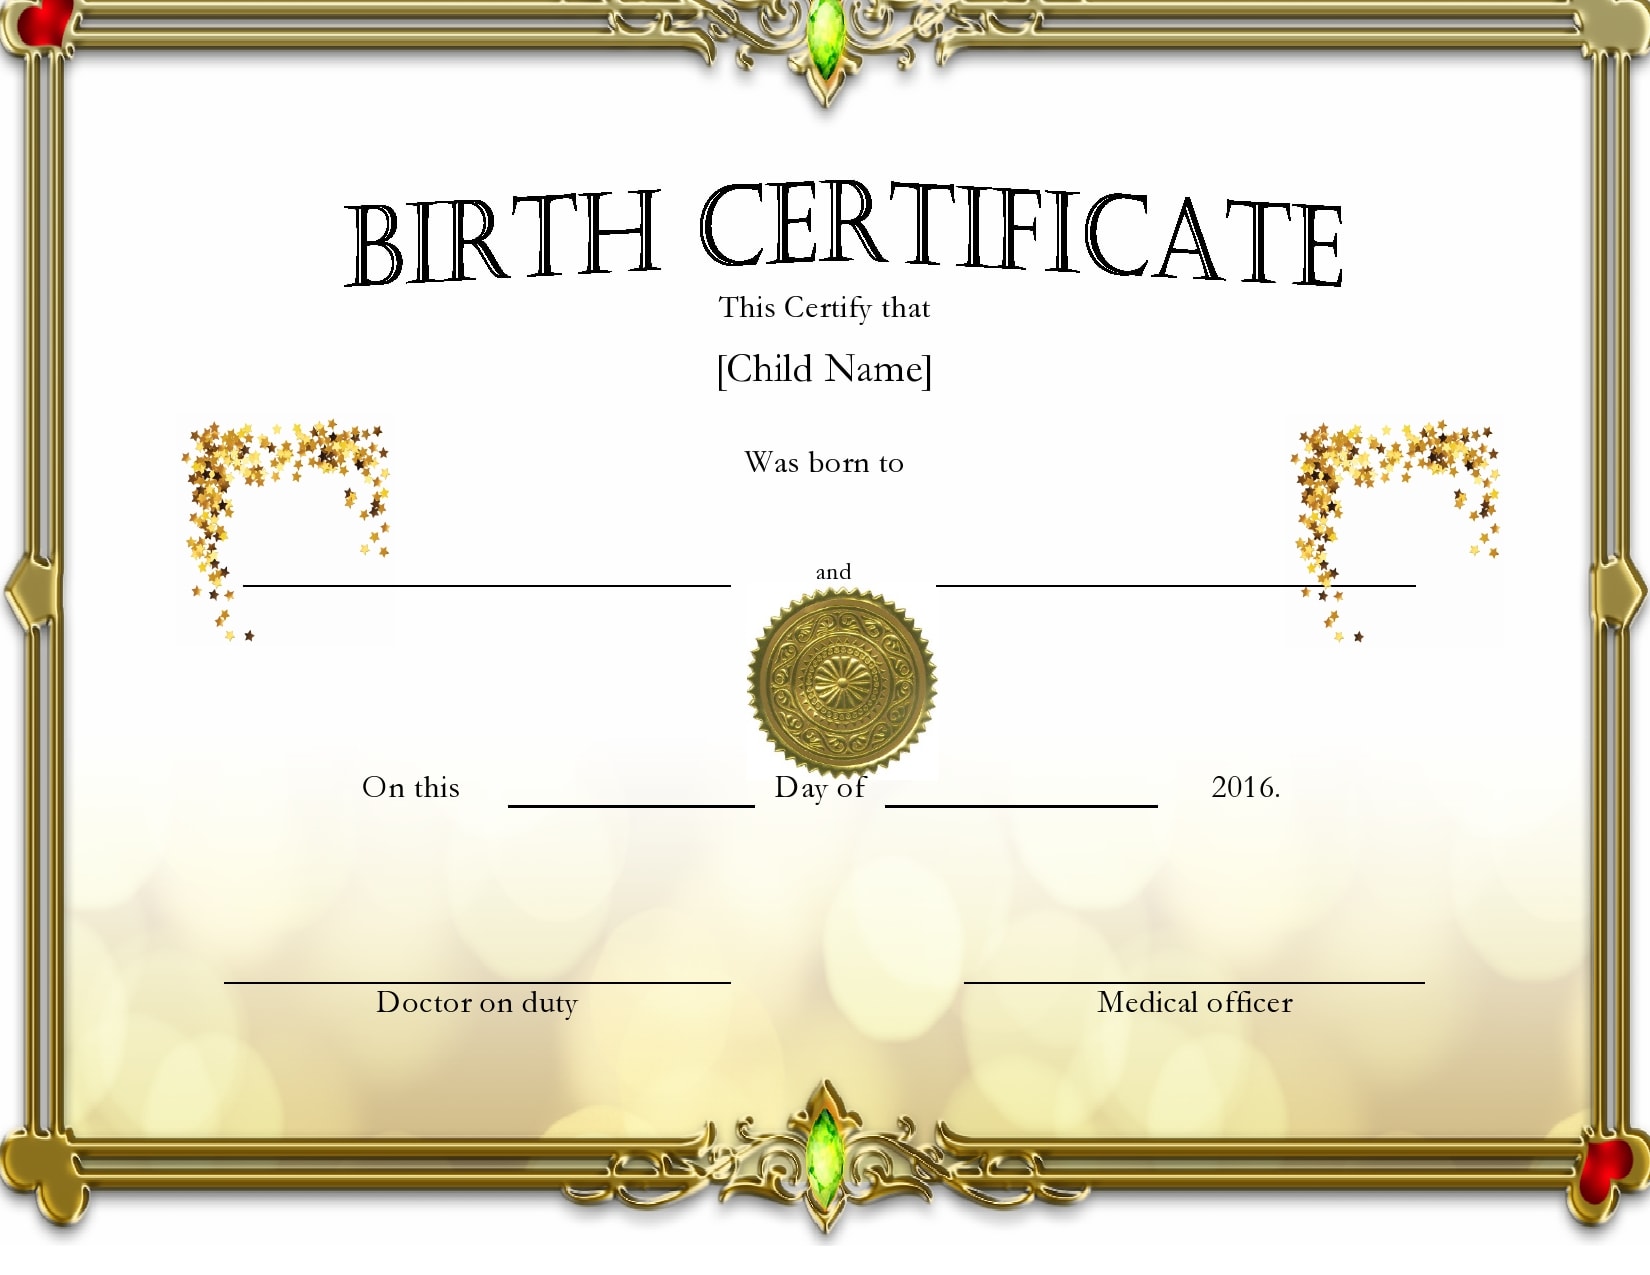 25 Blank Birth Certificate Templates (& Examples) - PrintableTemplates Intended For Fake Death Certificate Template